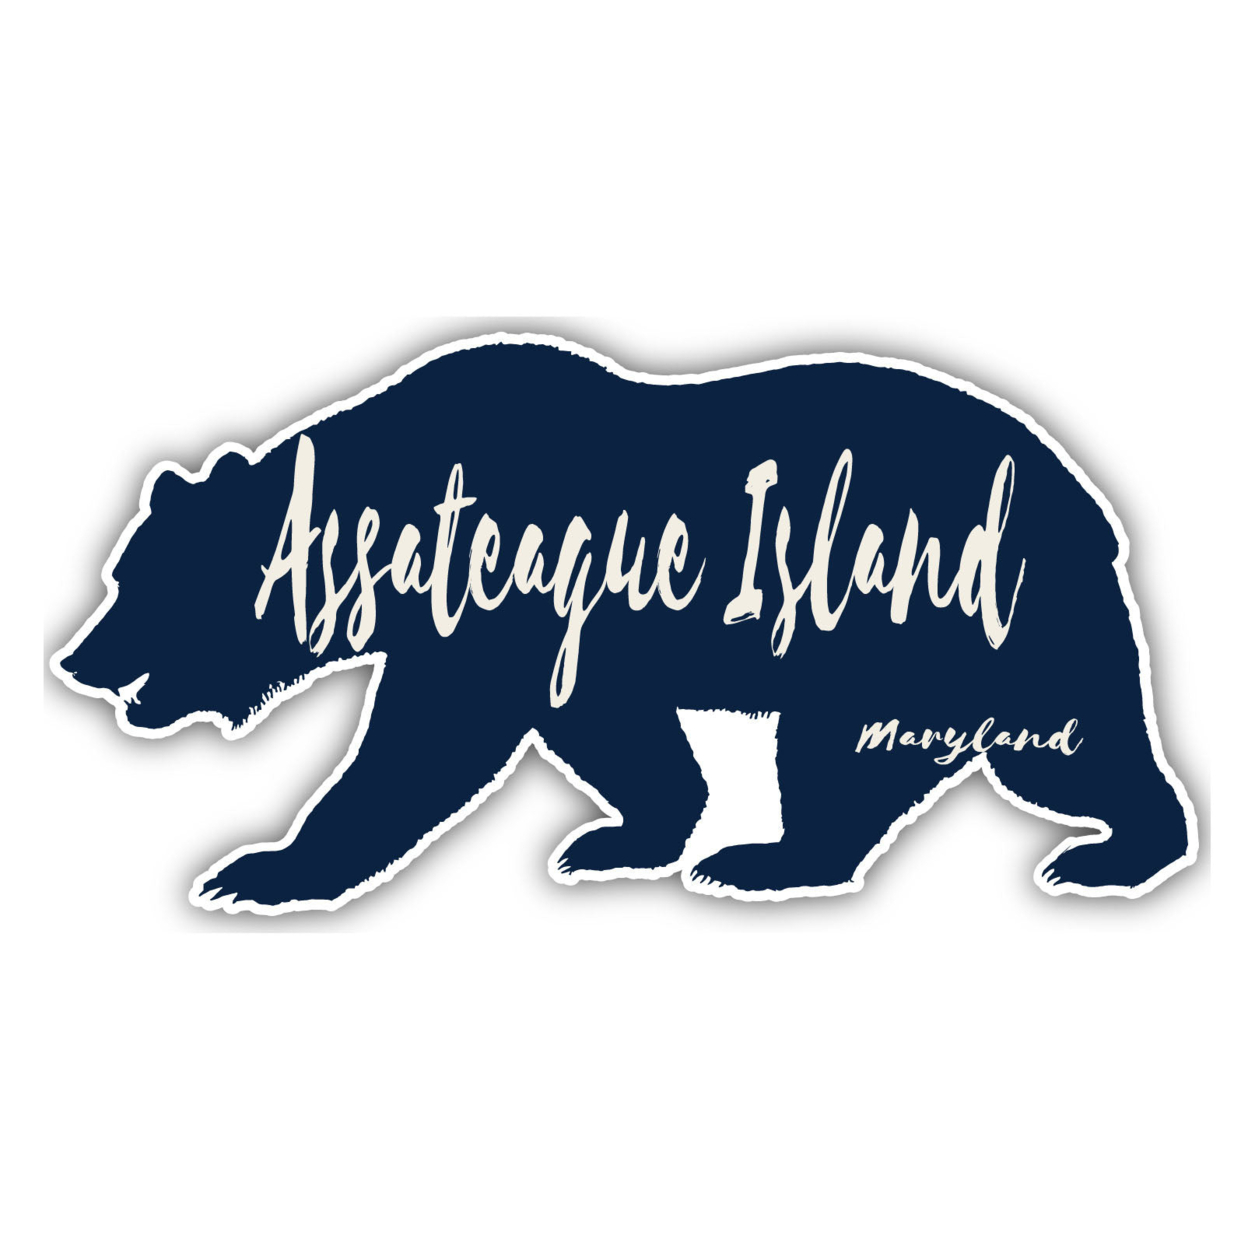 Assateague Island Maryland Souvenir Decorative Stickers (Choose Theme And Size) - 4-Pack, 12-Inch, Bear